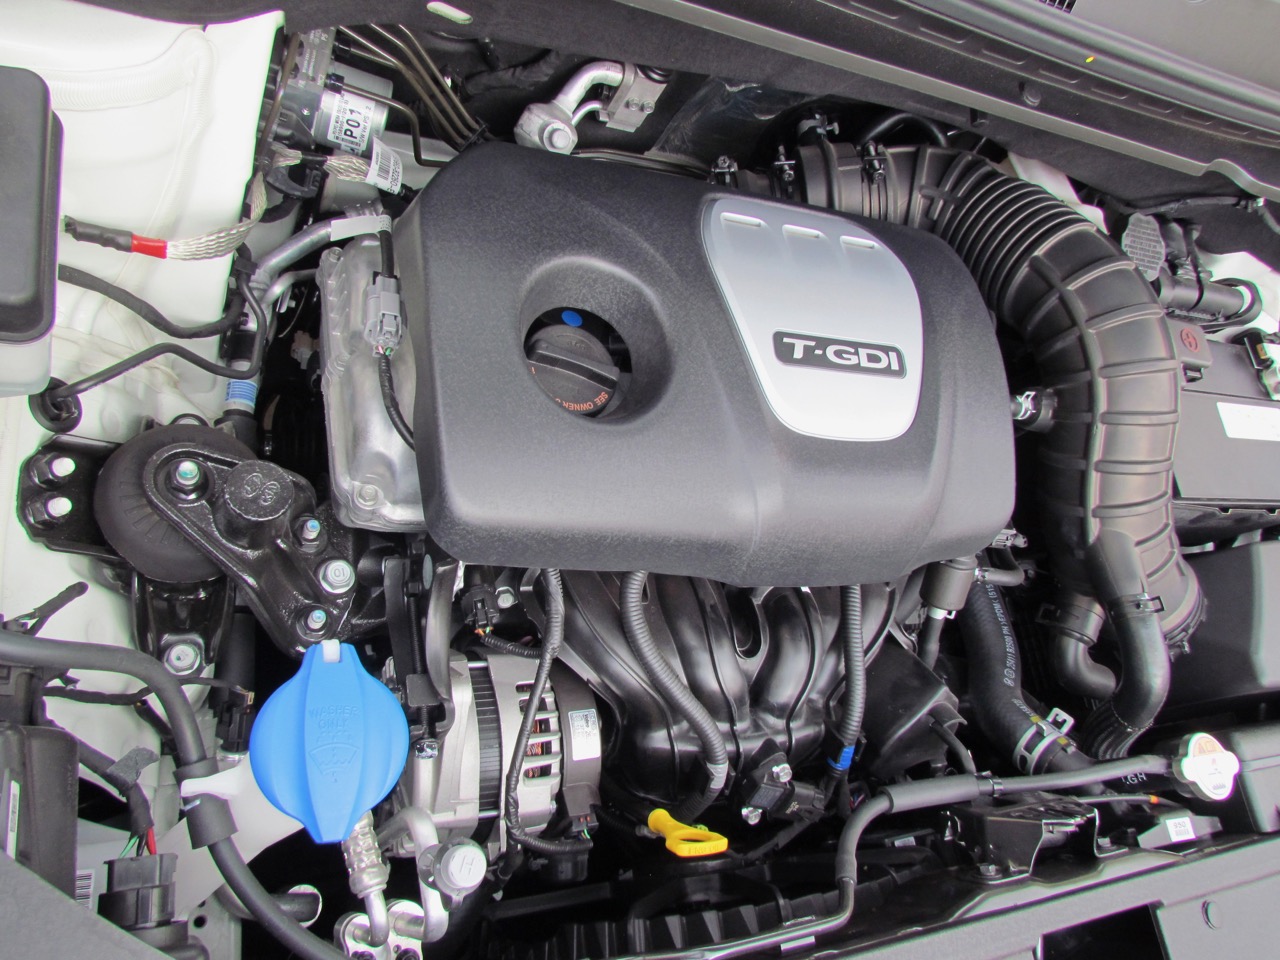 Turbo boosts engine's output to 201 horsepower